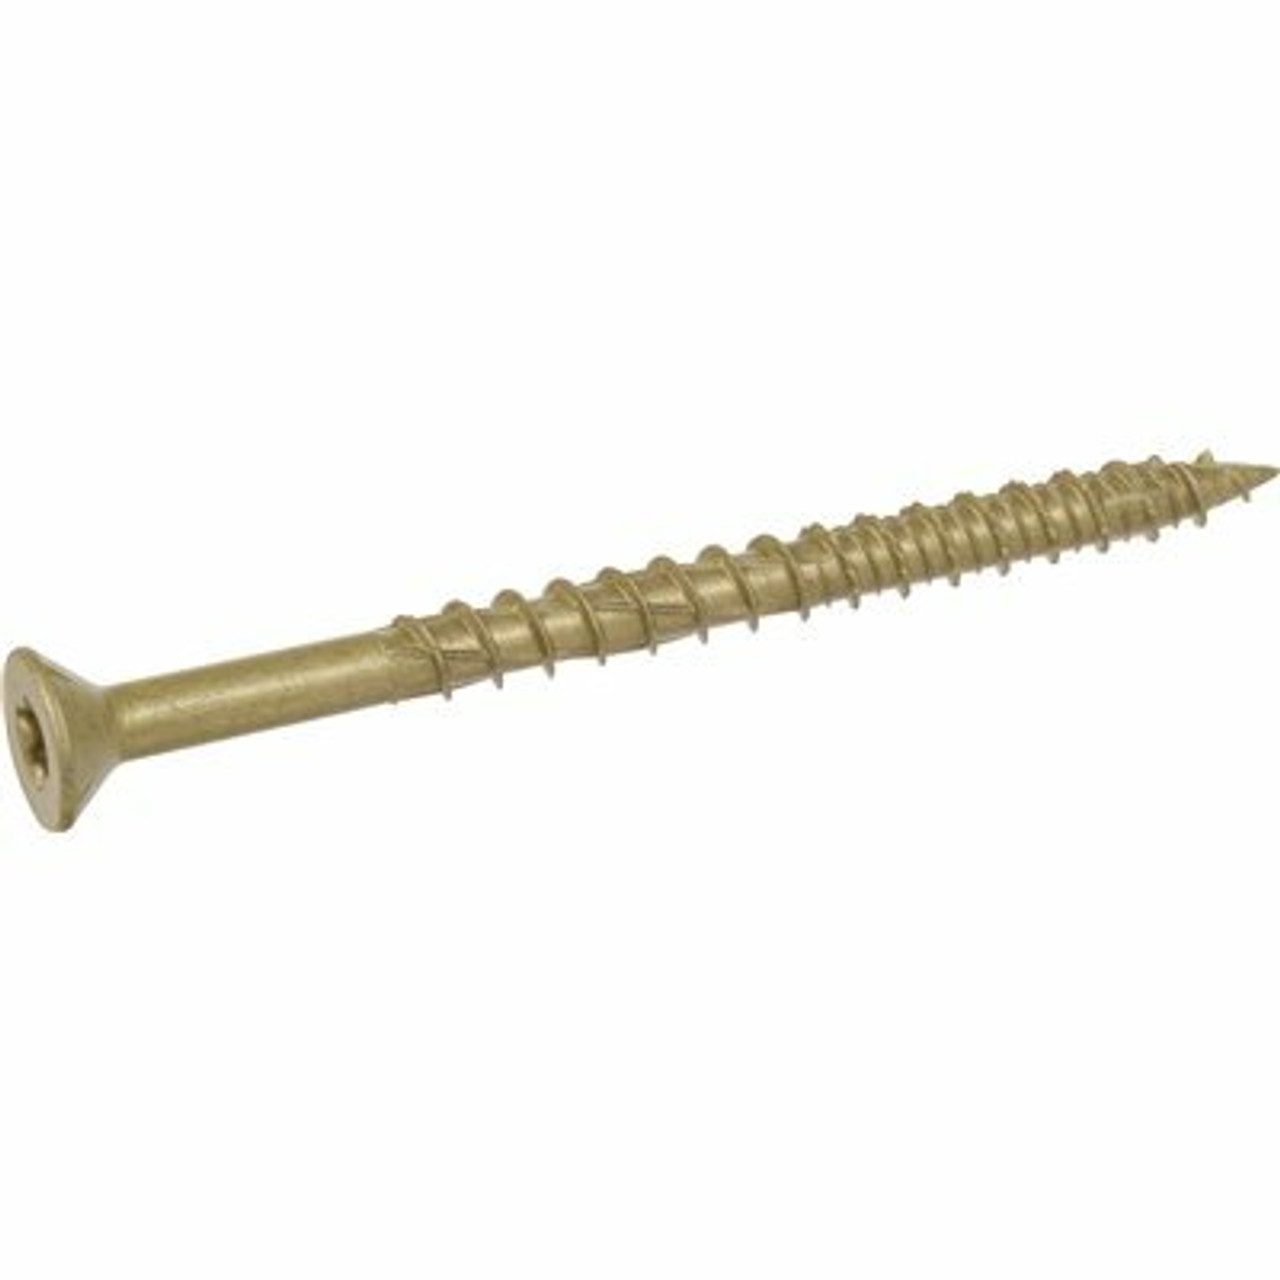 1/4 In. X 3-1/2 In. Bronze-Plated Star Drive Flat Head Screw Exterior (10-Pack)